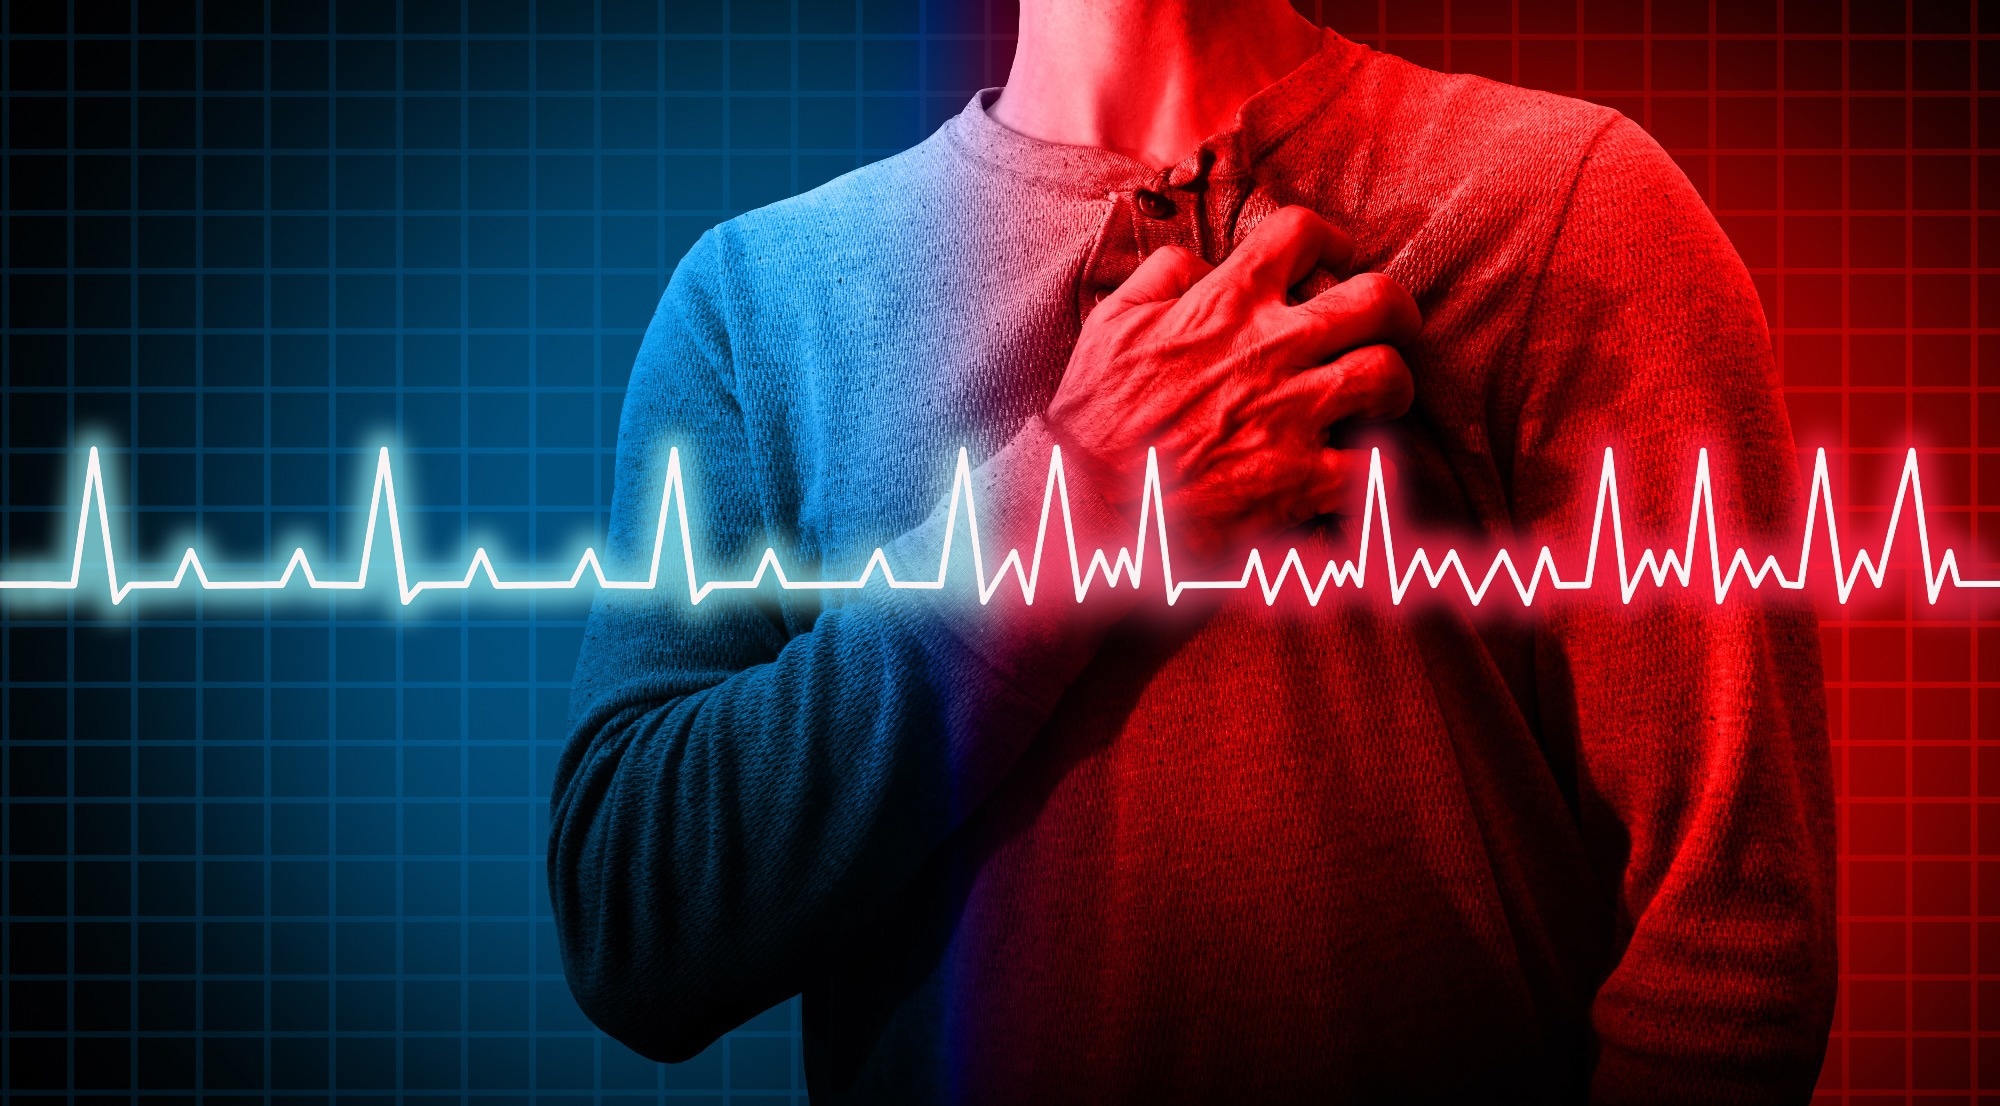 Study: Cannabis, cocaine, methamphetamine, and opiates increase the risk of incident atrial fibrillation. Image Credit: Lightspring / Shutterstock